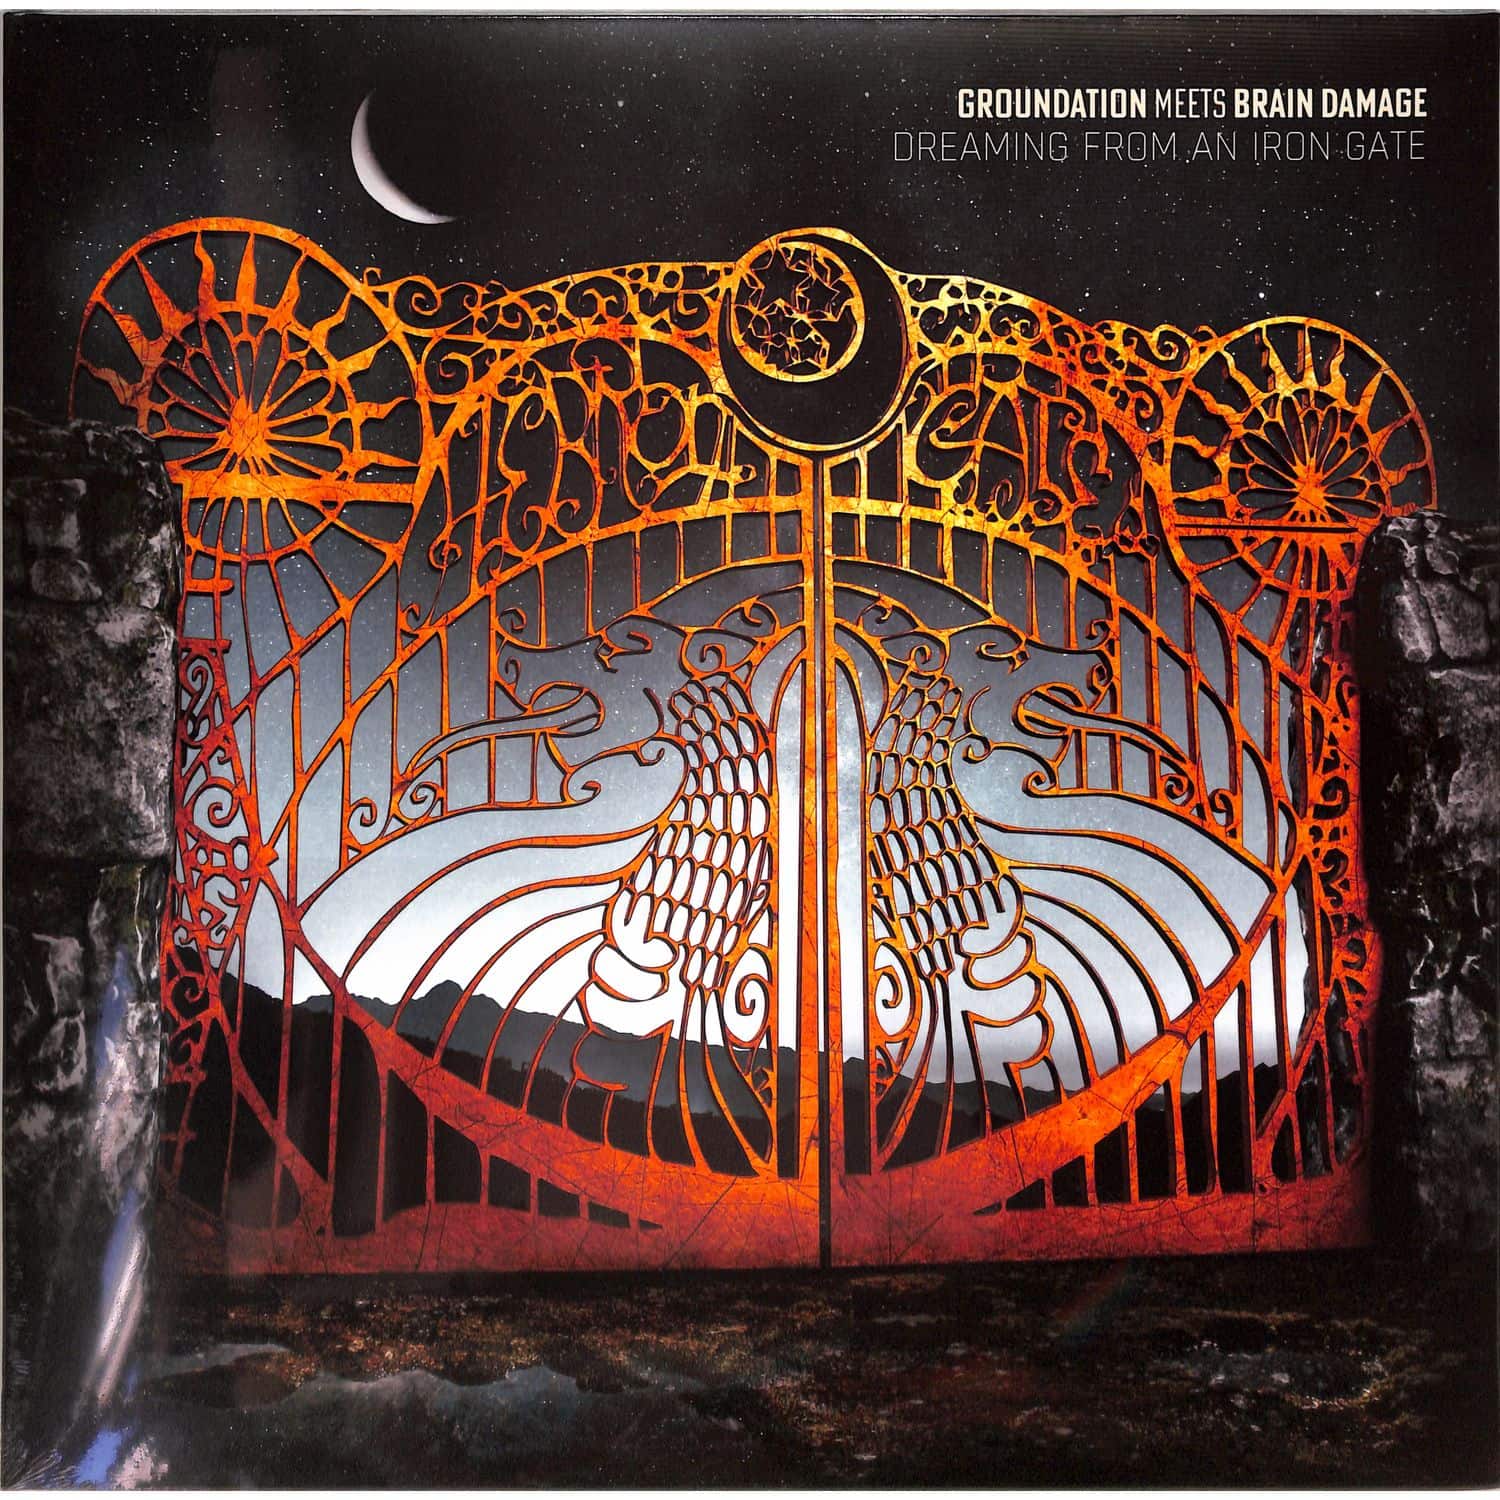 Groundation meets Brain Damage - DREAMING FROM AN IRON GATE 